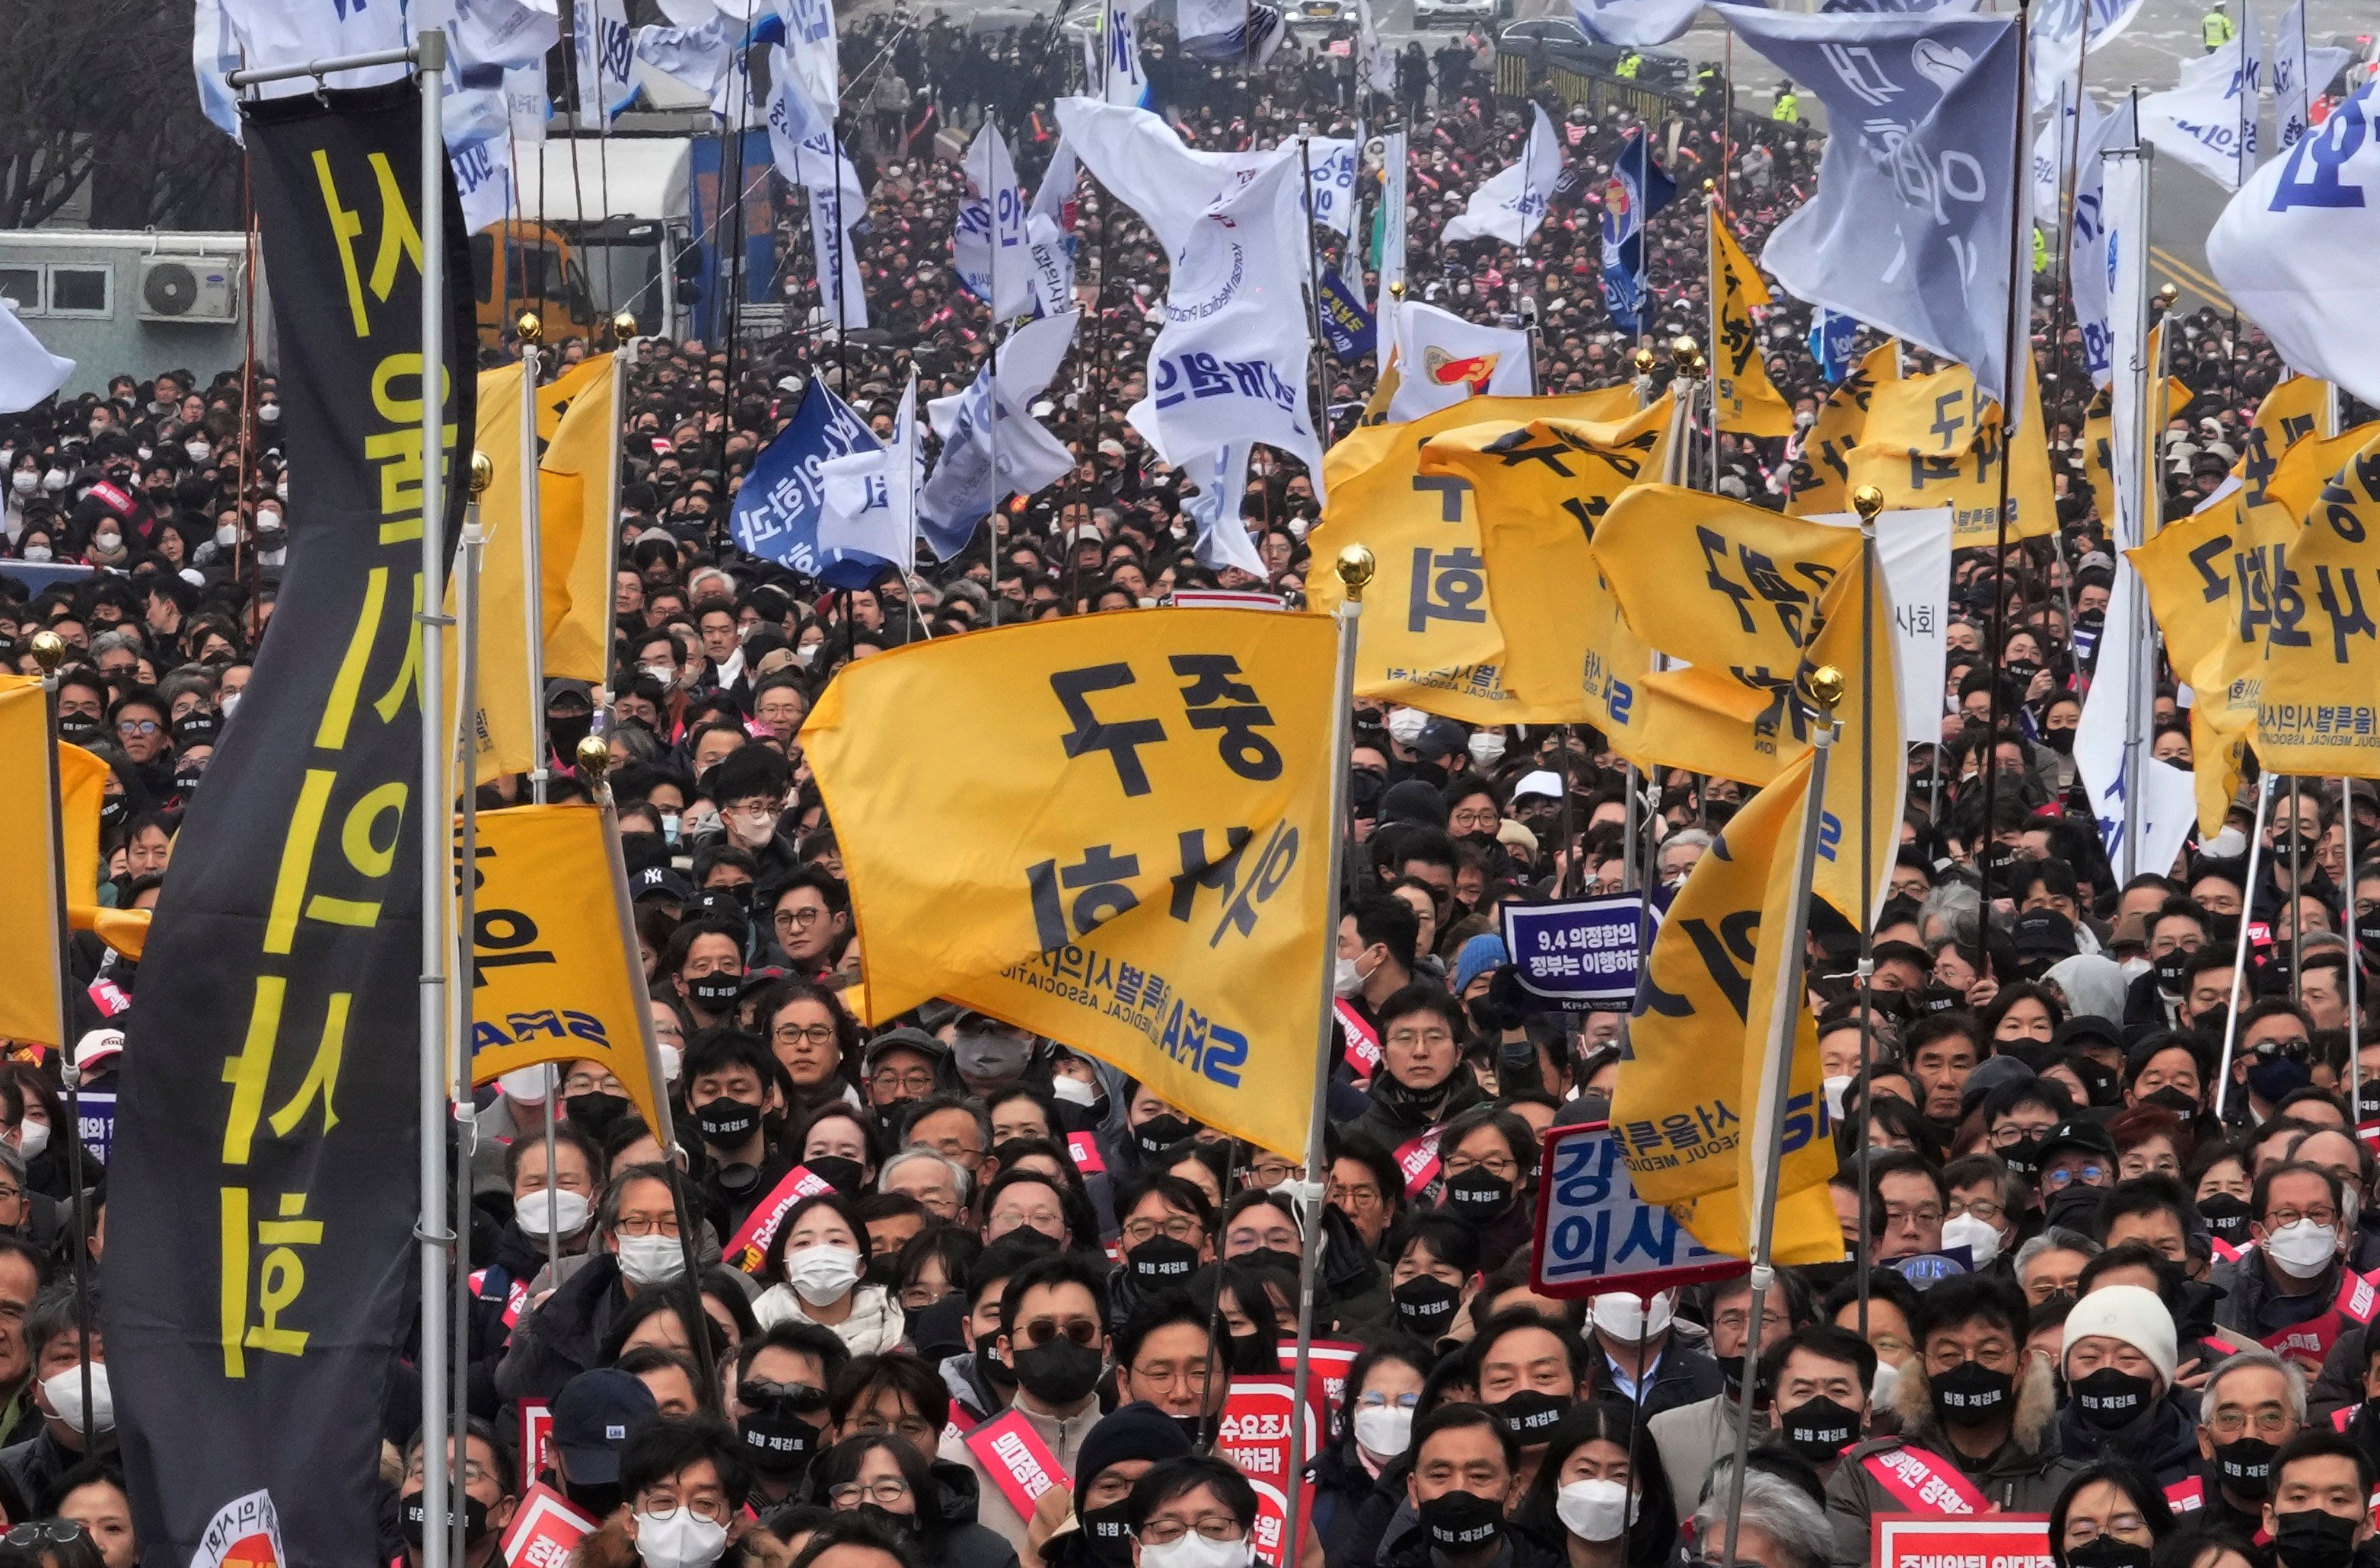 Doctors stage a rally against the South Korean government’s medical policy in Seoul on March 3. Photo: AP